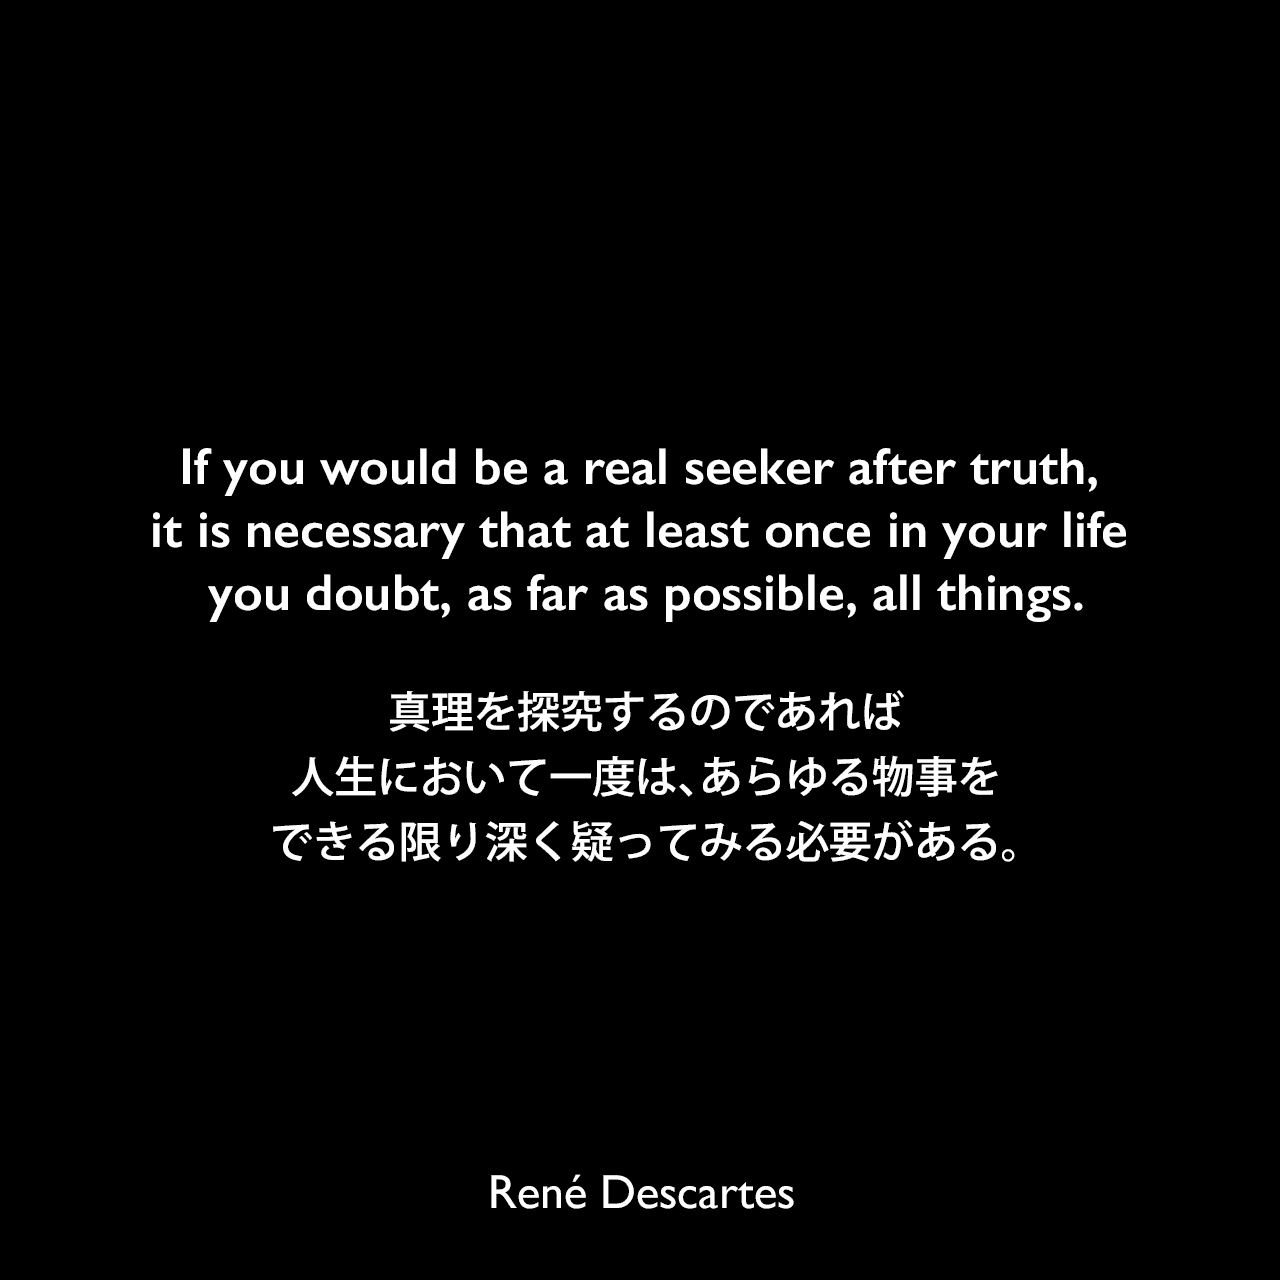 If you would be a real seeker after truth, it is necessary that at least once in your life you doubt, as far as possible, all things.真理を探究するのであれば、人生において一度は、あらゆる物事をできる限り深く疑ってみる必要がある。- デカルトの著書「哲学原理」よりRené Descartes